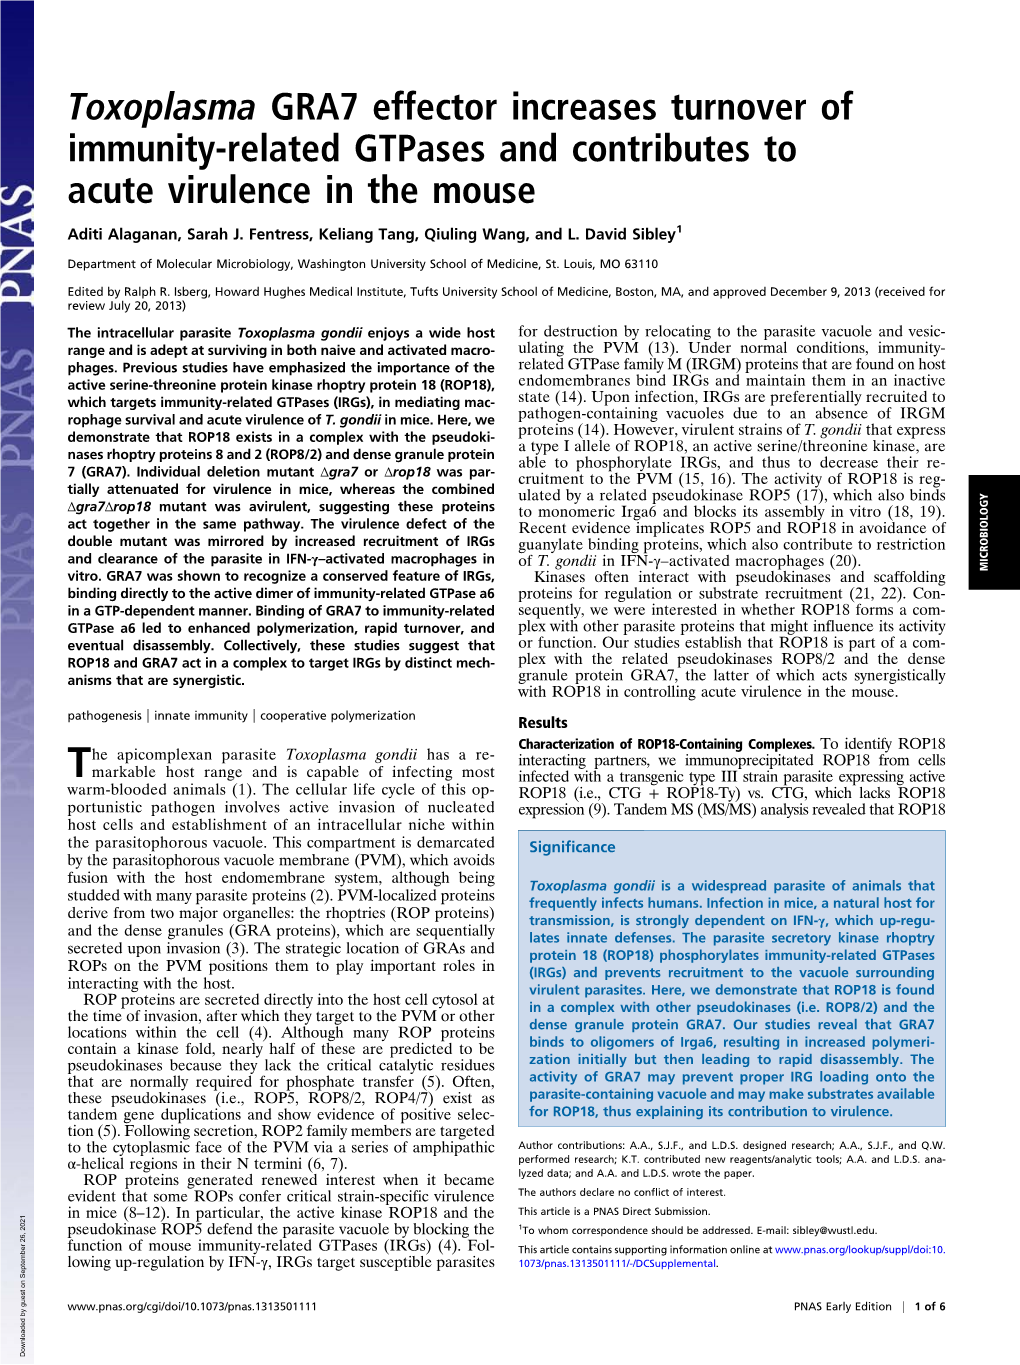 Toxoplasma GRA7 Effector Increases Turnover of Immunity-Related Gtpases and Contributes to Acute Virulence in the Mouse